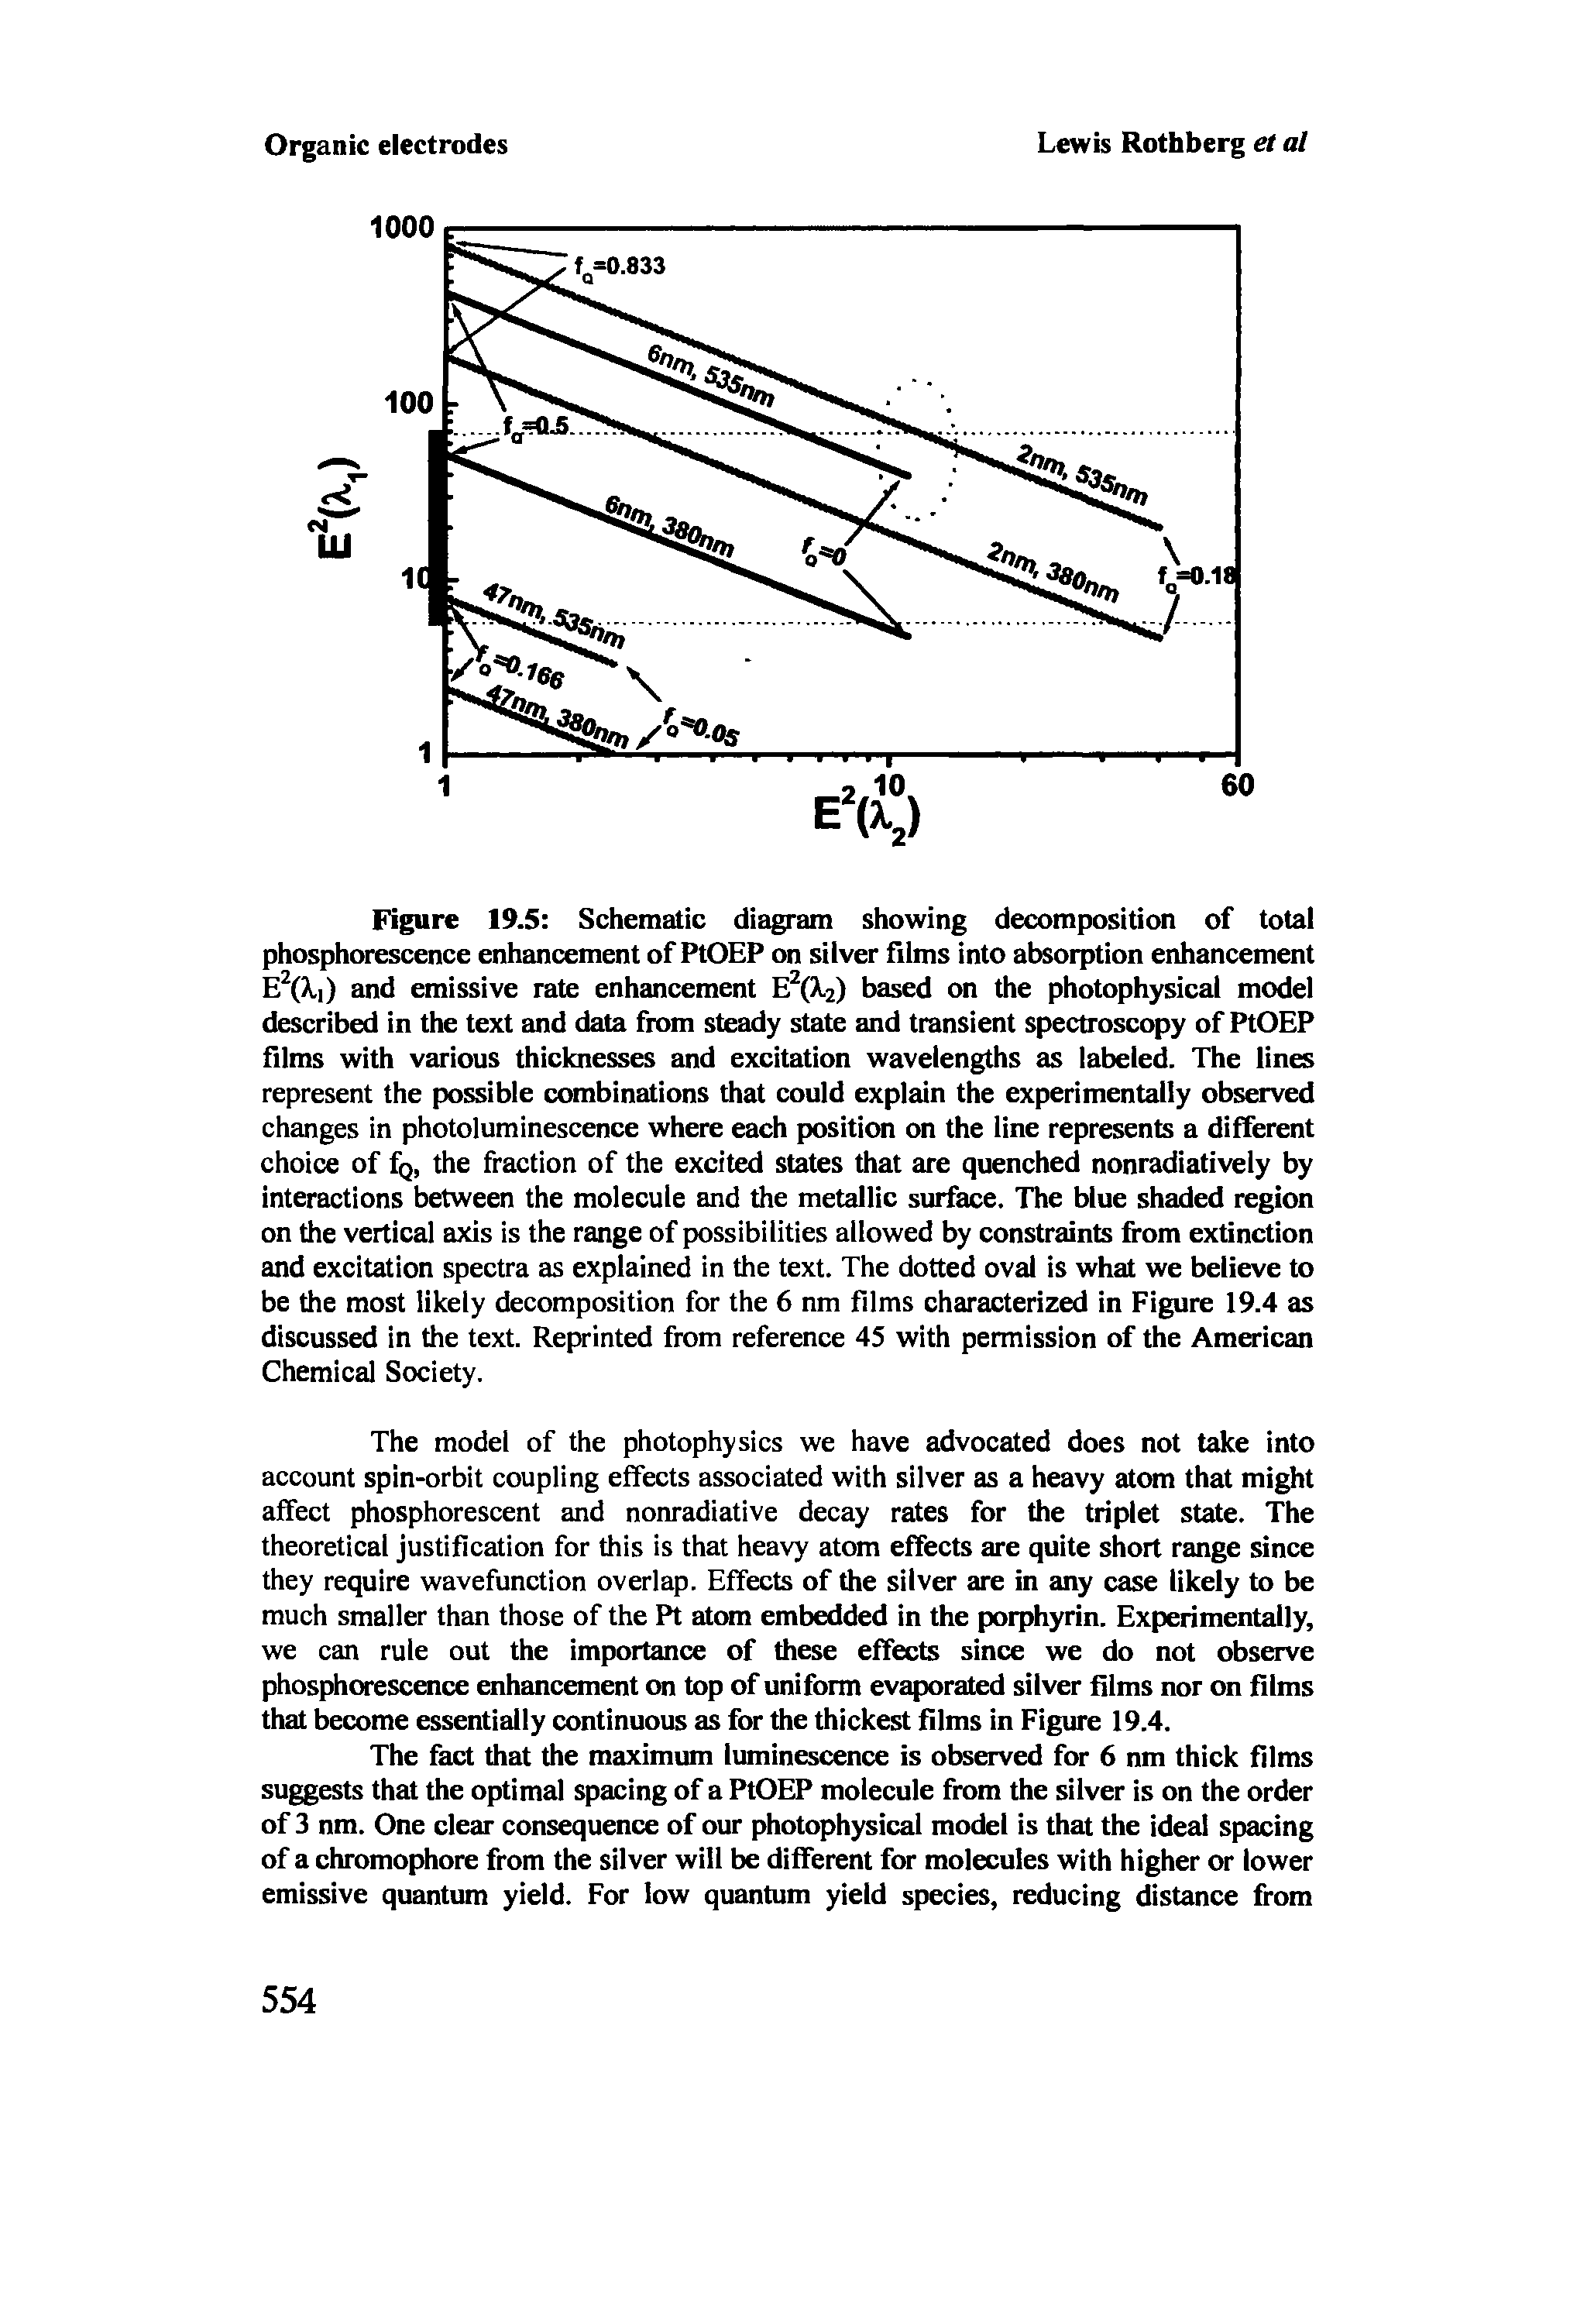 Figure 19.5 Schematic diagram showing decomposition of total phosphorescence enhancement of PtOEP on silver films into absorption enhancement E X. ) and emissive rate enhancement E (%.2) based on the photophysical model described in the text and data from steady state and transient spectroscopy of PtOEP films with various thicknesses and excitation wavelengths as labeled. The lines represent the possible combinations that could explain the experimentally observed changes in photoluminescence where each position on the line represents a different choice of fQ, the fraction of the excited states that are quenched nonradiatively by interactions between the molecule and the metallic surface. The blue shaded region on the vertical axis is the range of possibilities allowed by constraints from extinction and excitation spectra as explained in the text. The dotted oval is what we believe to be the most likely decomposition for the 6 nm films characterized in Figure 19.4 as discussed in the text. Reprinted from reference 45 with permission of the American Chemical Society.